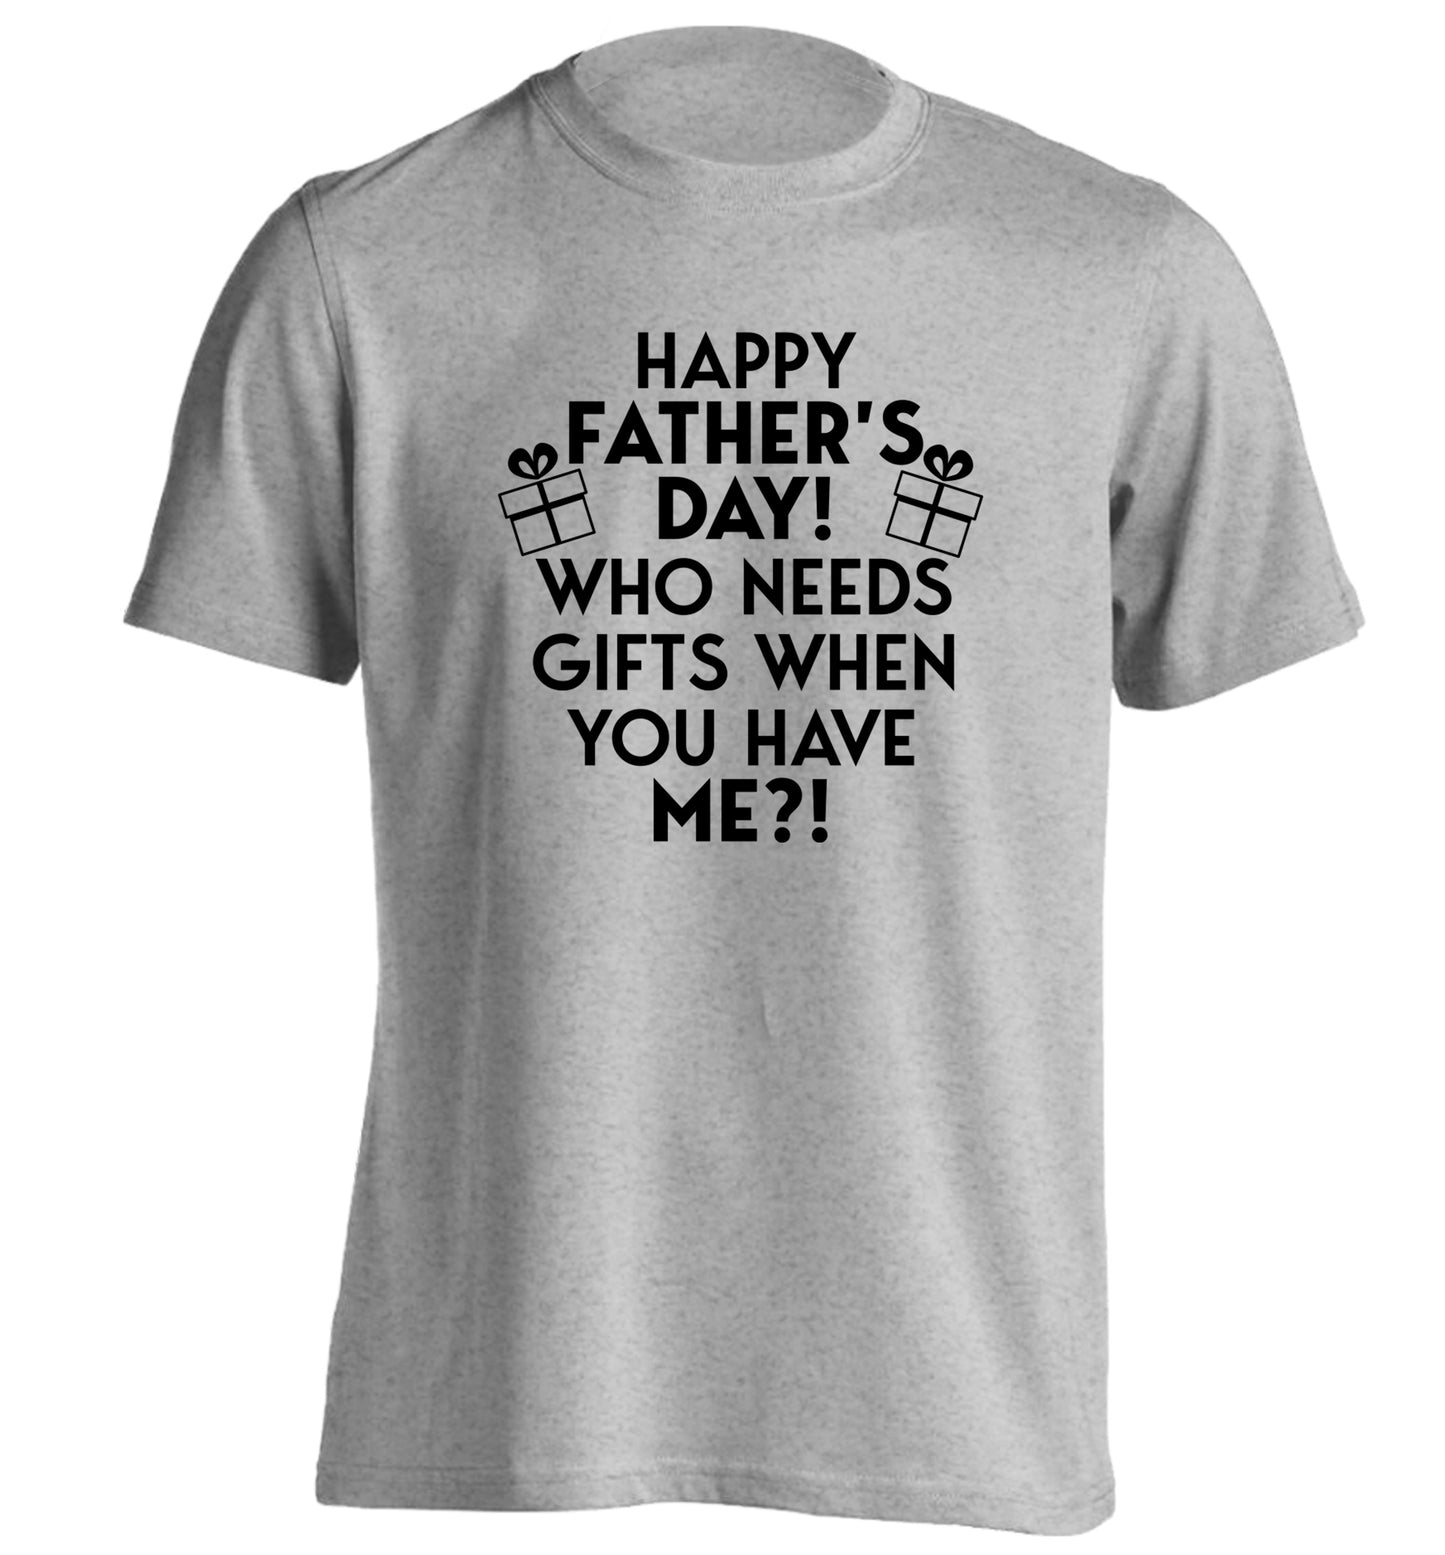 Happy Father's day, who needs a present when you have me adults unisex grey Tshirt 2XL